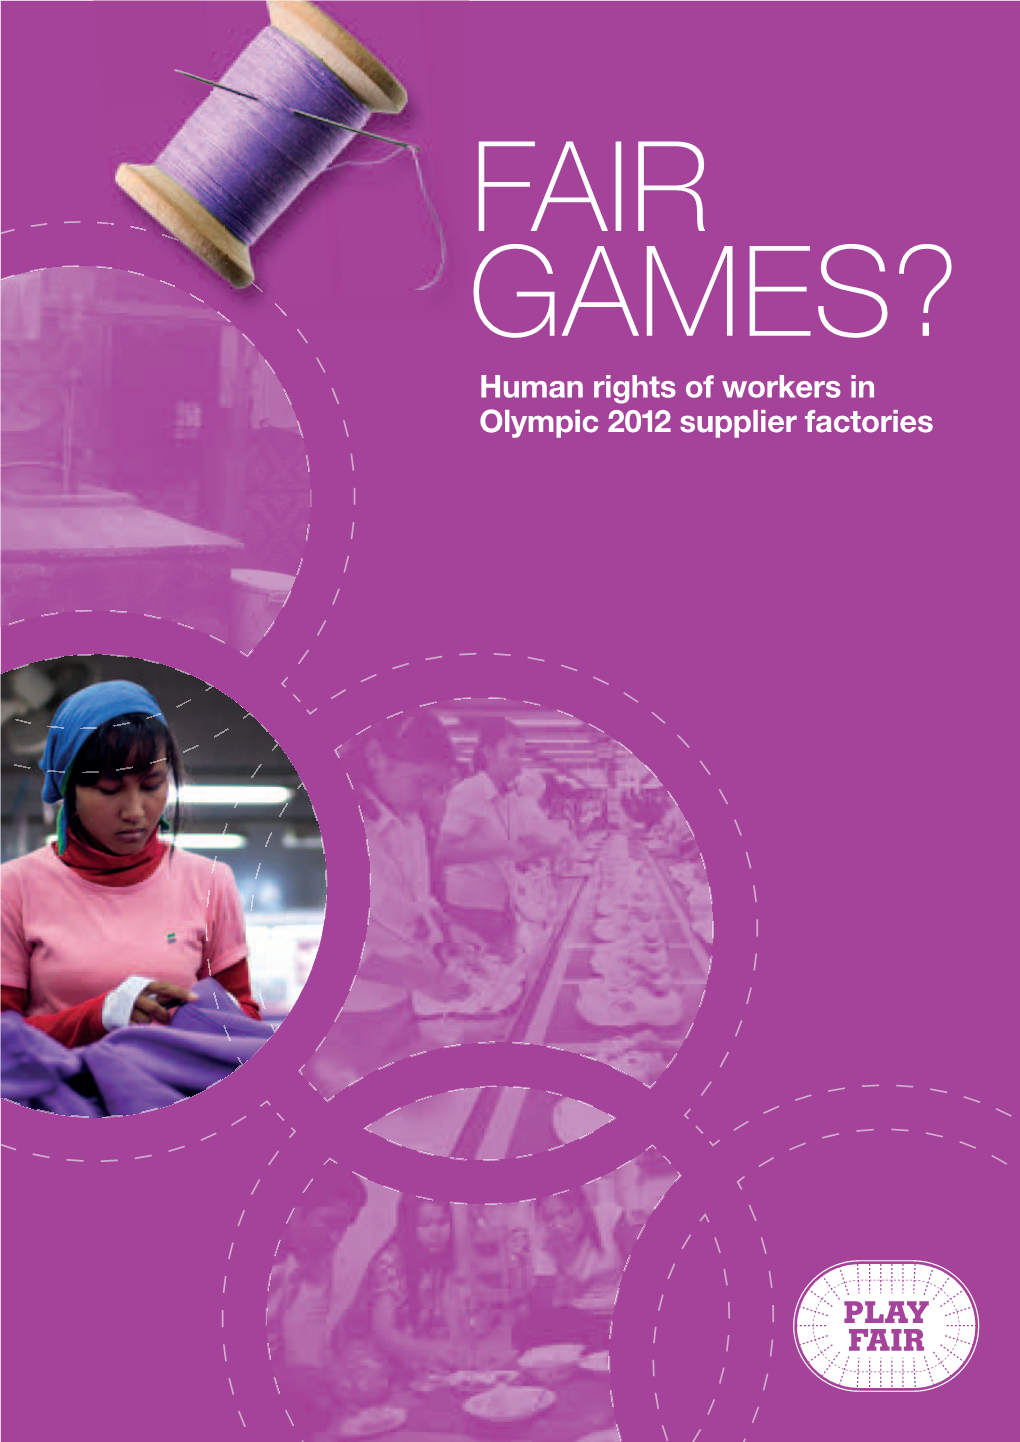 Fair Games? Human Rights of Workers in Olympic 2012 Supplier Factories Written by the International Textile, Garment and Leather Workers’ Federation (ITGLWF)